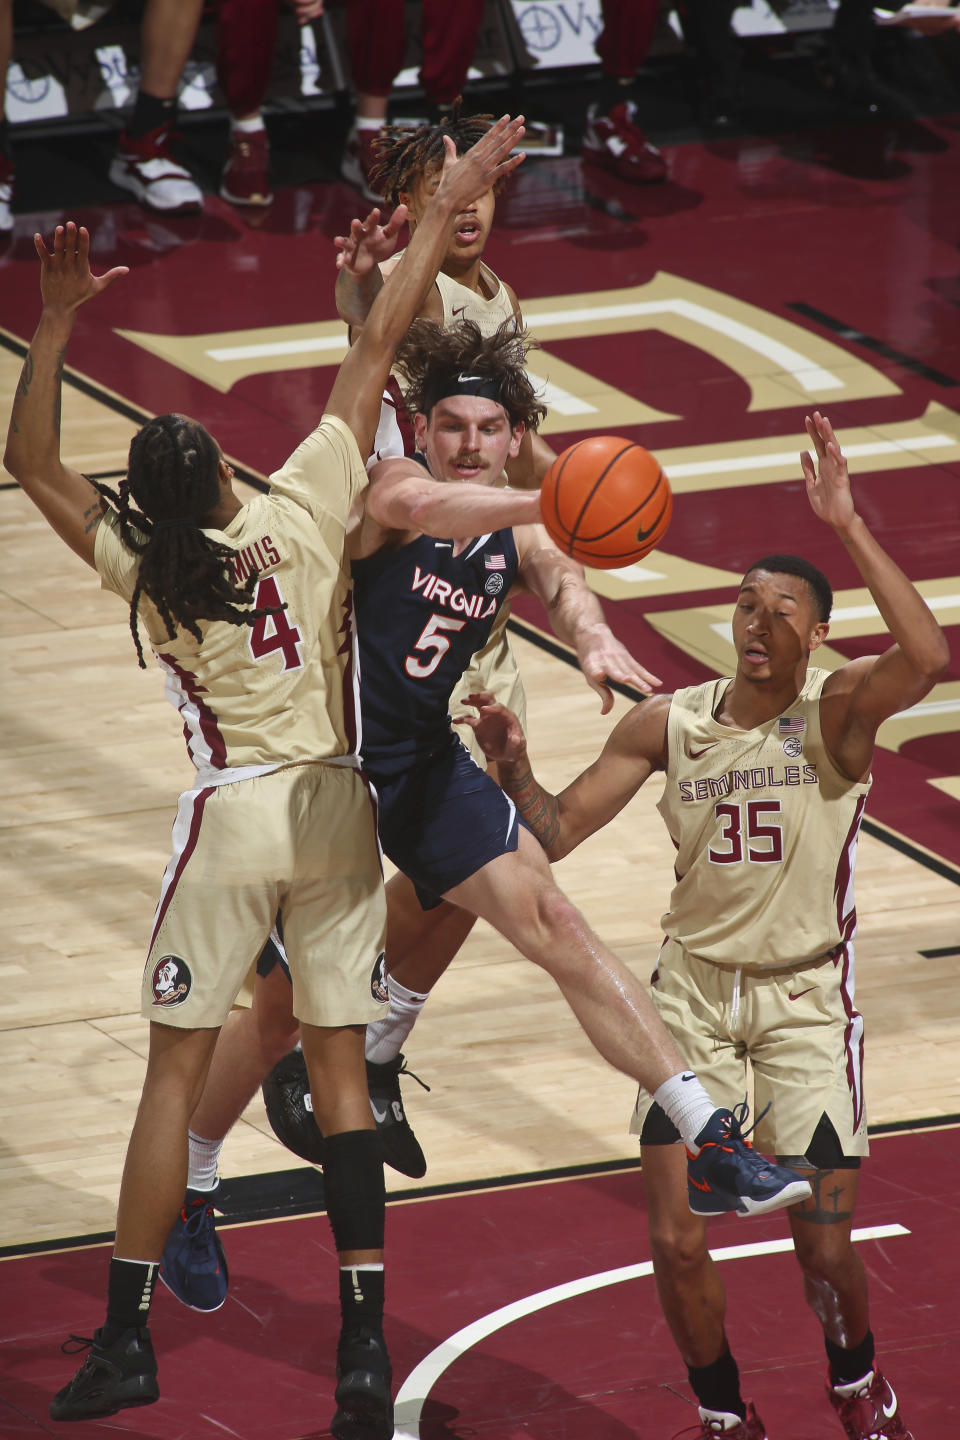 Virginia forward Ben Vander Plas (5) passes the ball as he is triple-teamed by Florida State defenders in the first half of an NCAA college basketball game in Tallahassee, Fla., Saturday, Jan. 14, 2023. (AP Photo/Phil Sears)